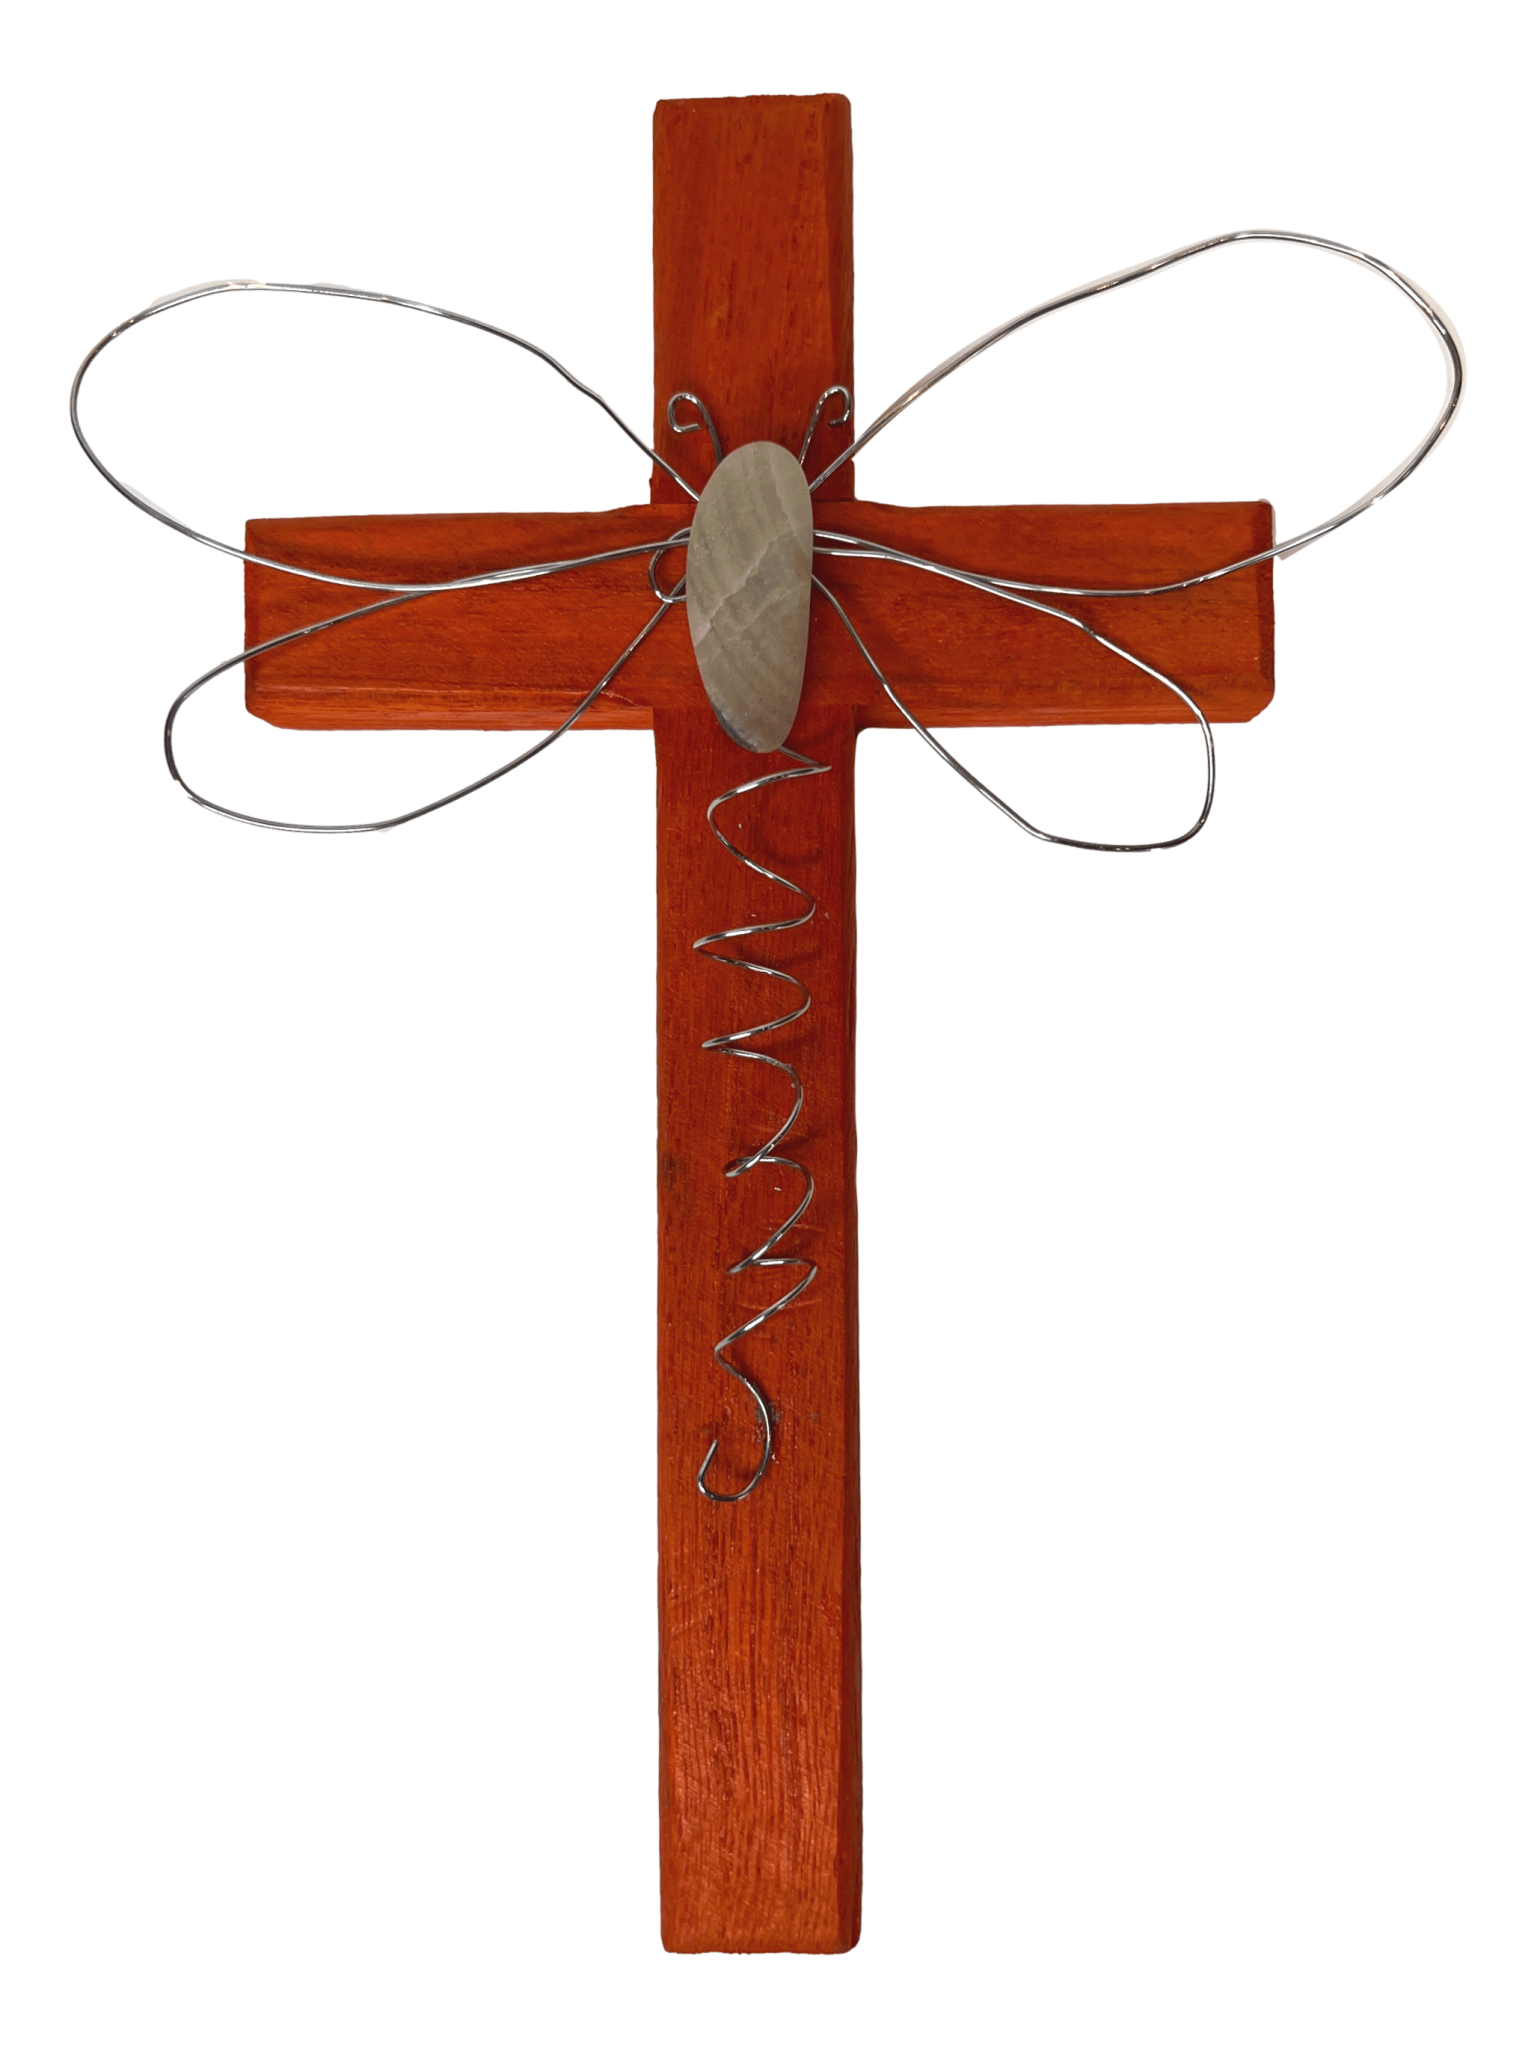 Cross Wall Hang Orange Wood Single Wire Dragonfly Shape Stone Center Handcrafted by Local Artisan 4 1/2 L x 3/4 W x 8 H Inches - Ysleta Mission Gift Shop- VOTED El Paso's Best Gift Shop